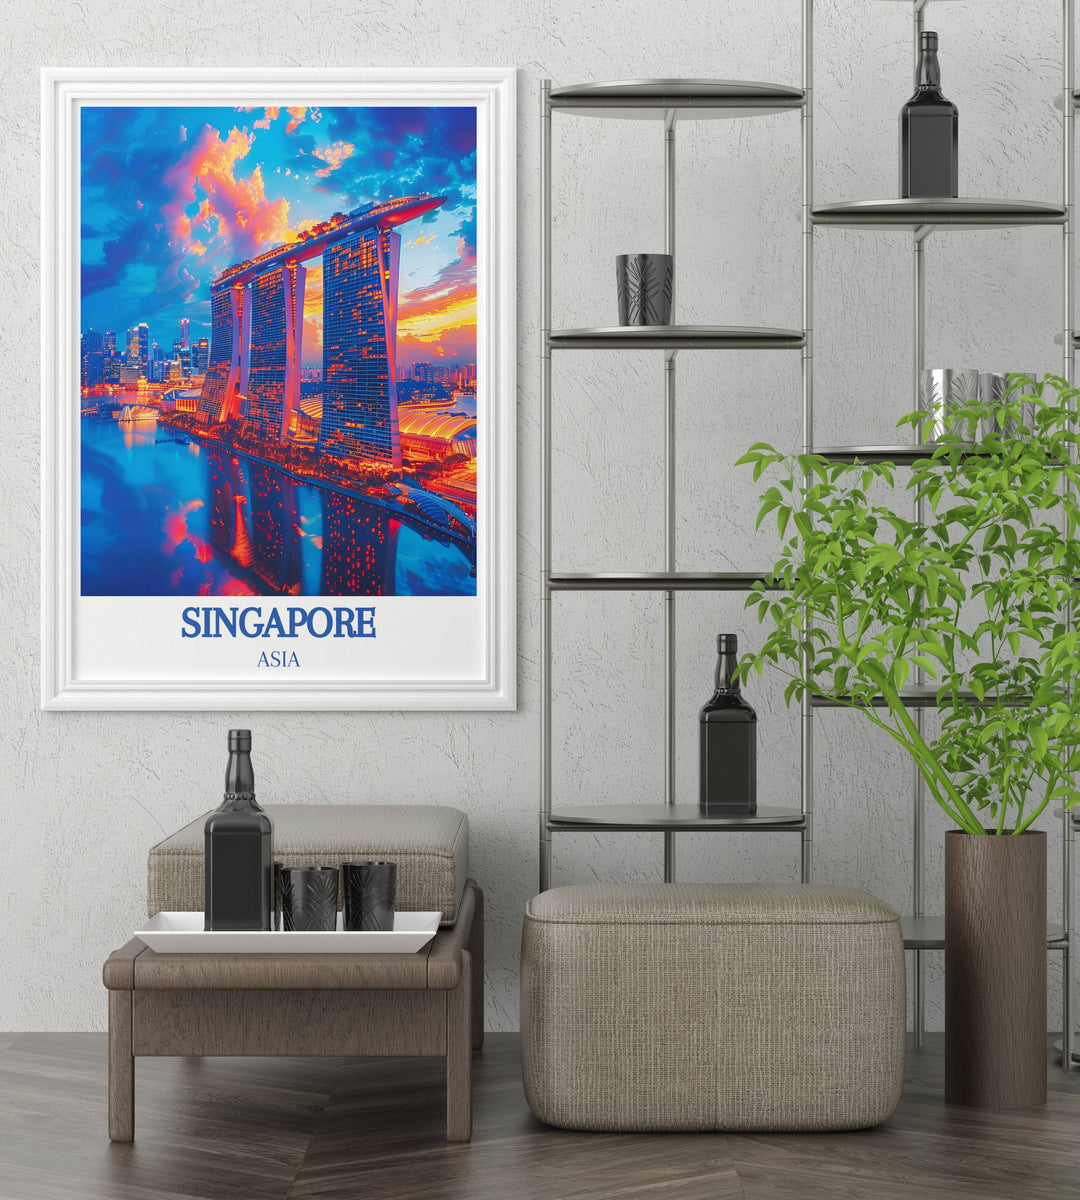 Vibrant aerial shot of Marina Bay Sands during a dazzling fireworks display, adding a dynamic and spectacular visual element to any travel art collection or gallery wall.